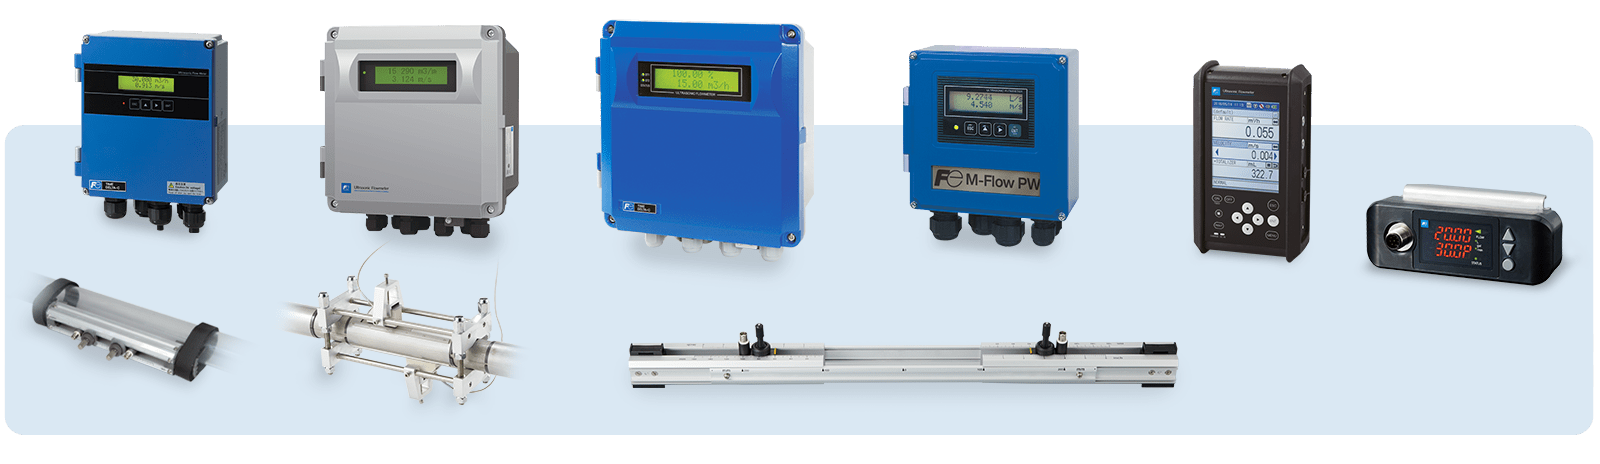 discover the power of ultrasonic flow meter